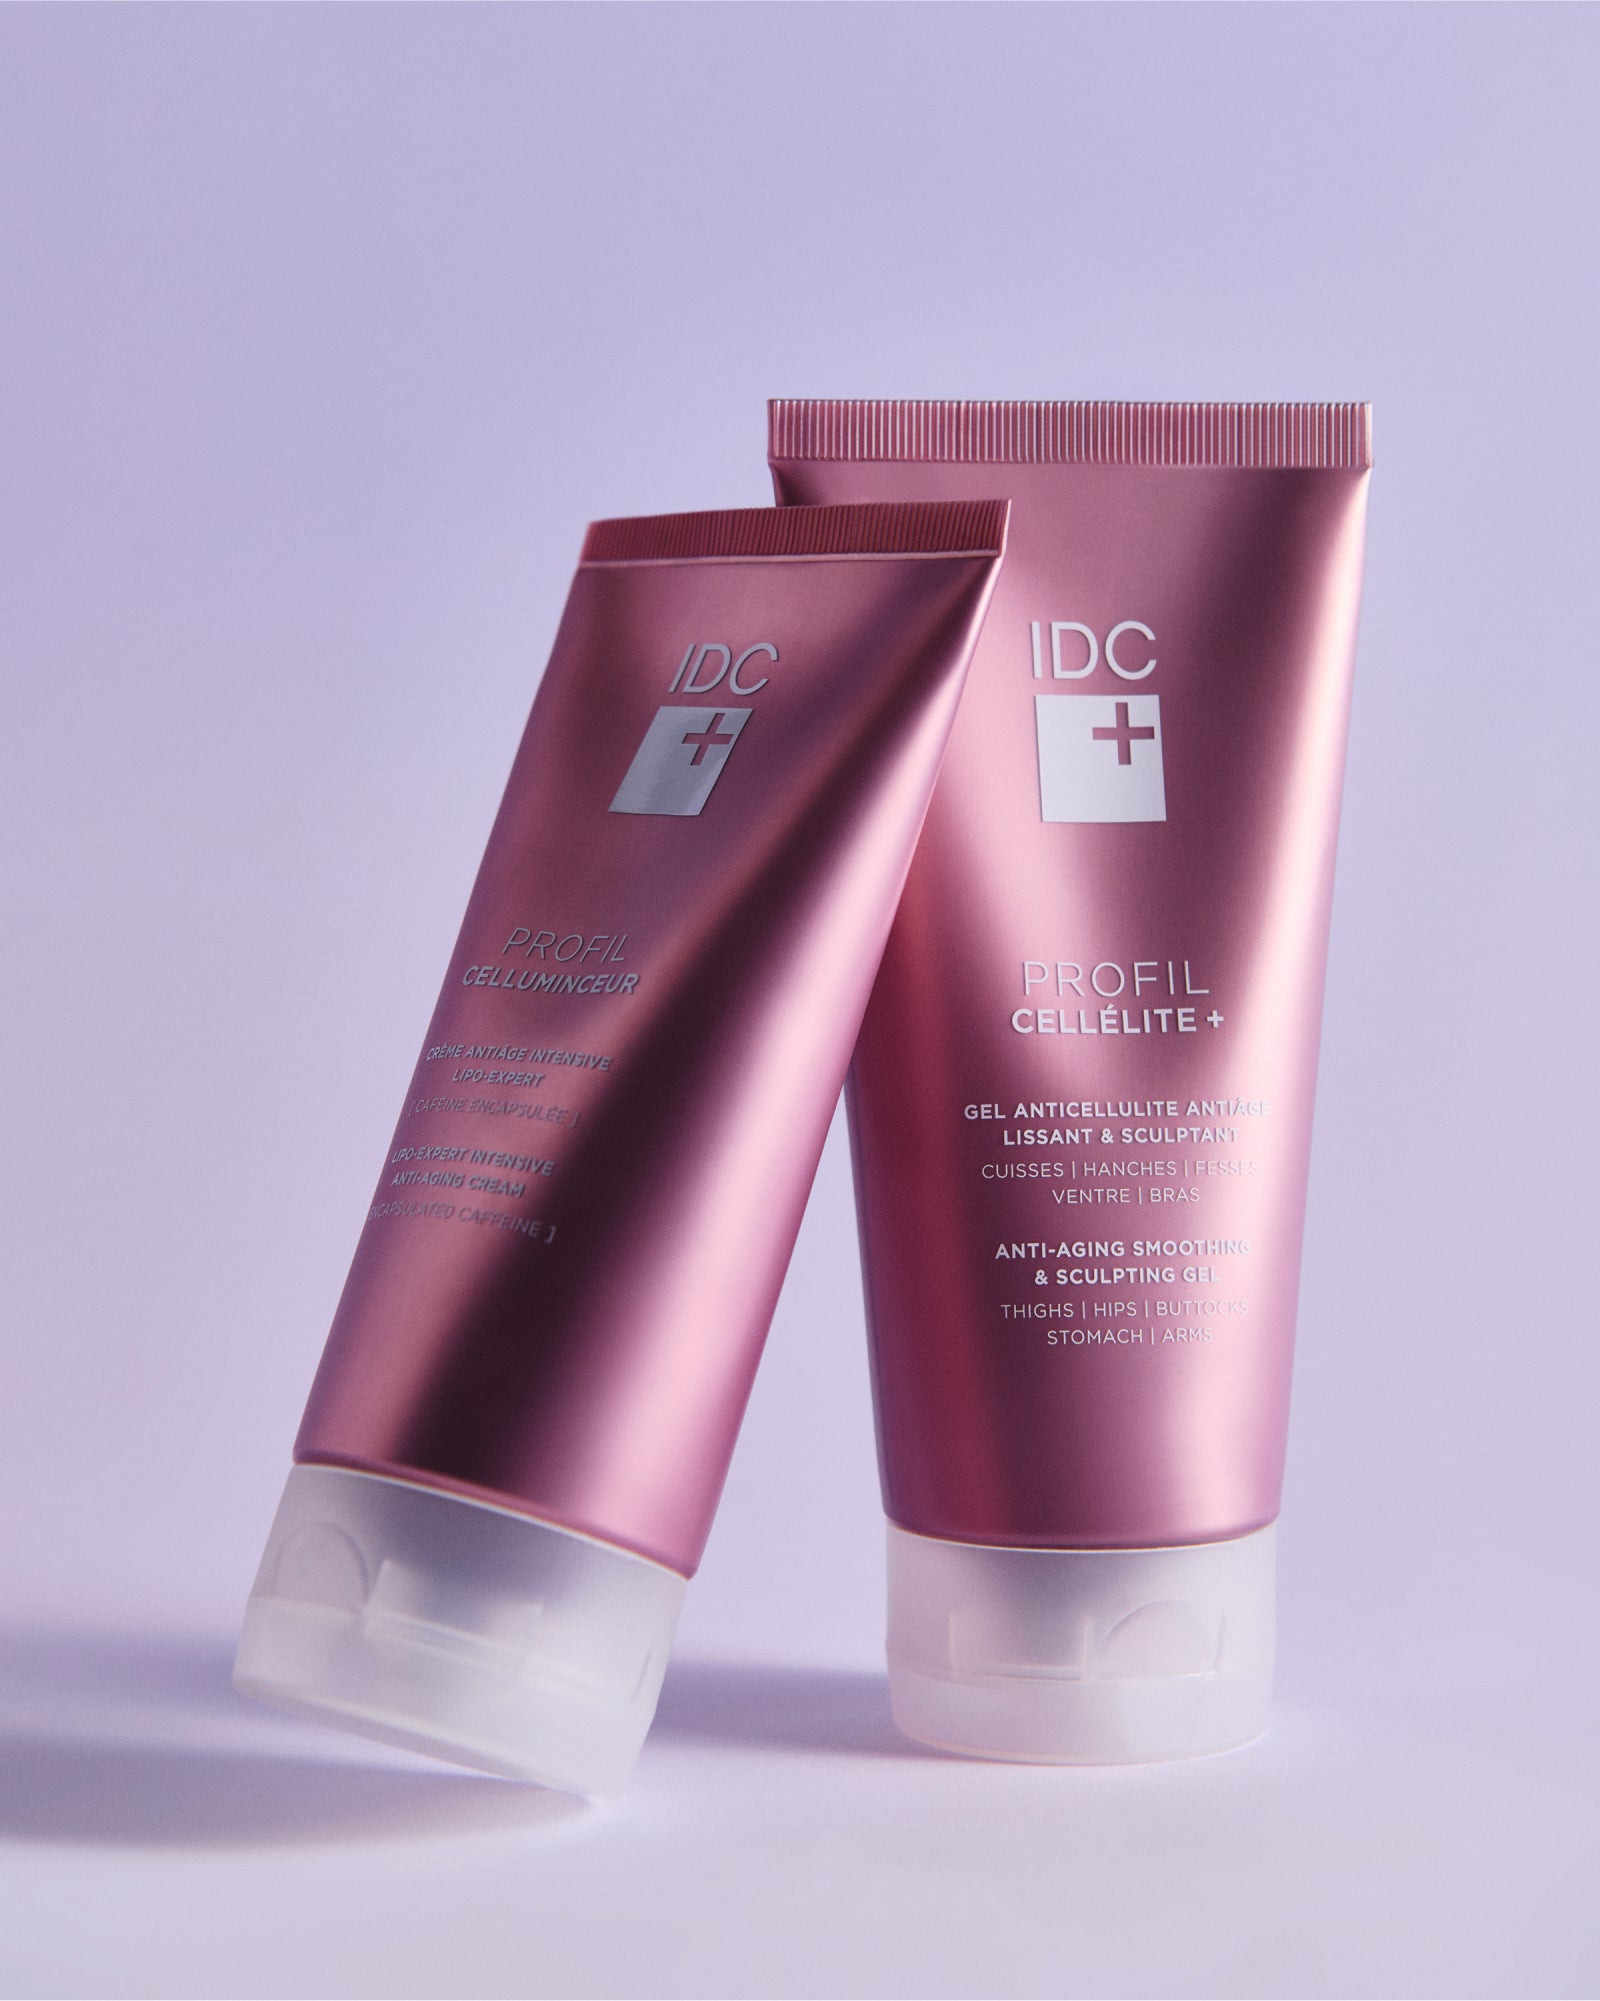 Profil Cellélite + | Anti-Aging Smoothing and Sculpting Gel